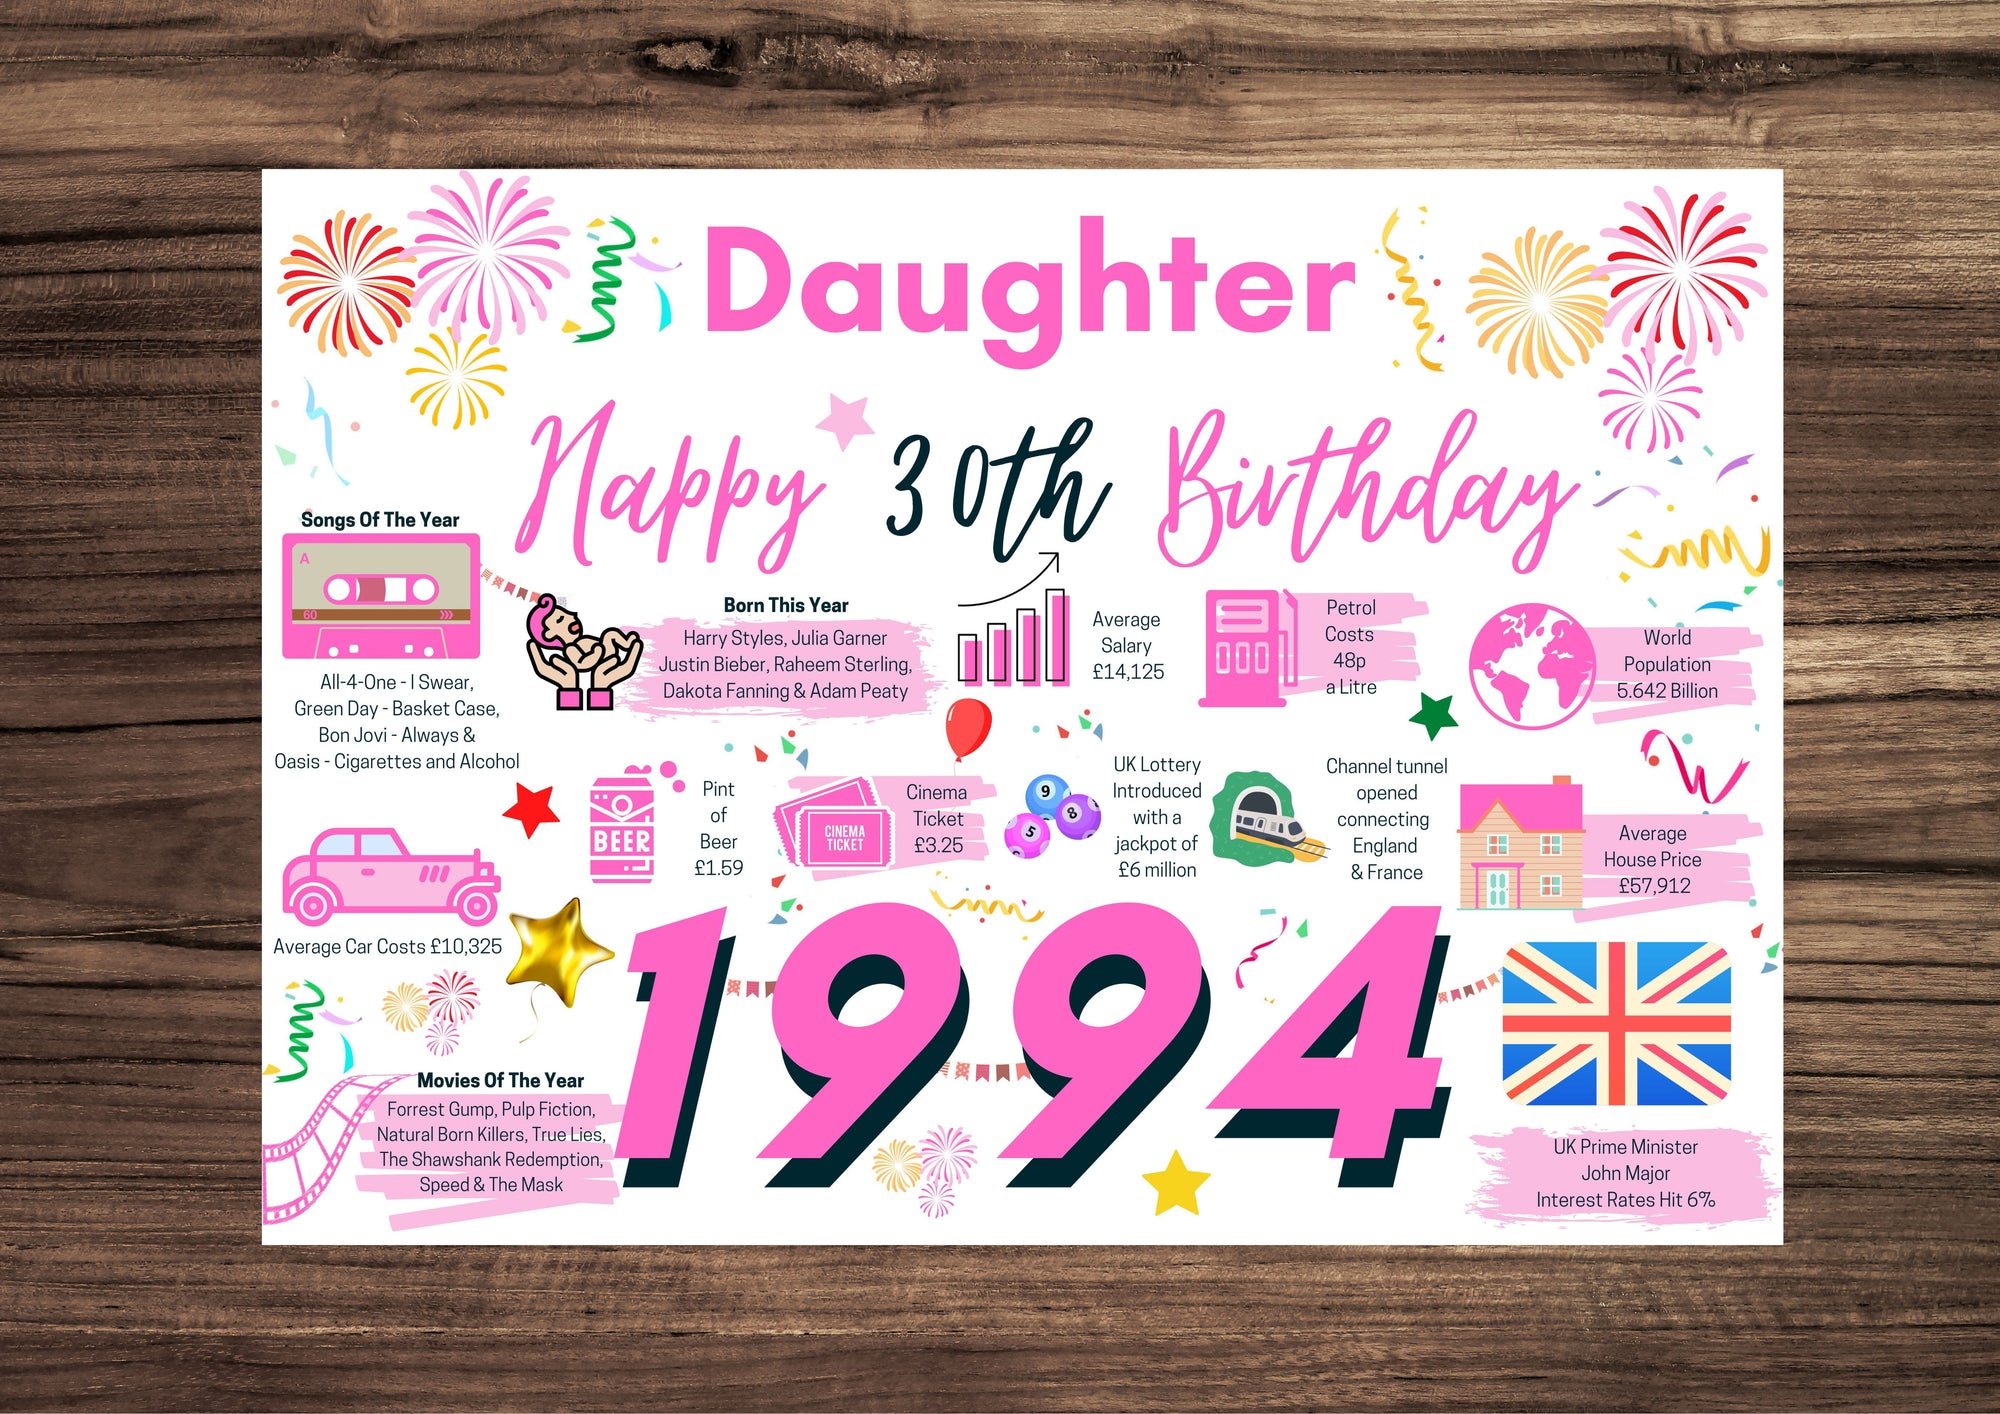 30th Birthday Card For Daughter, Born In 1994 Facts Milestone